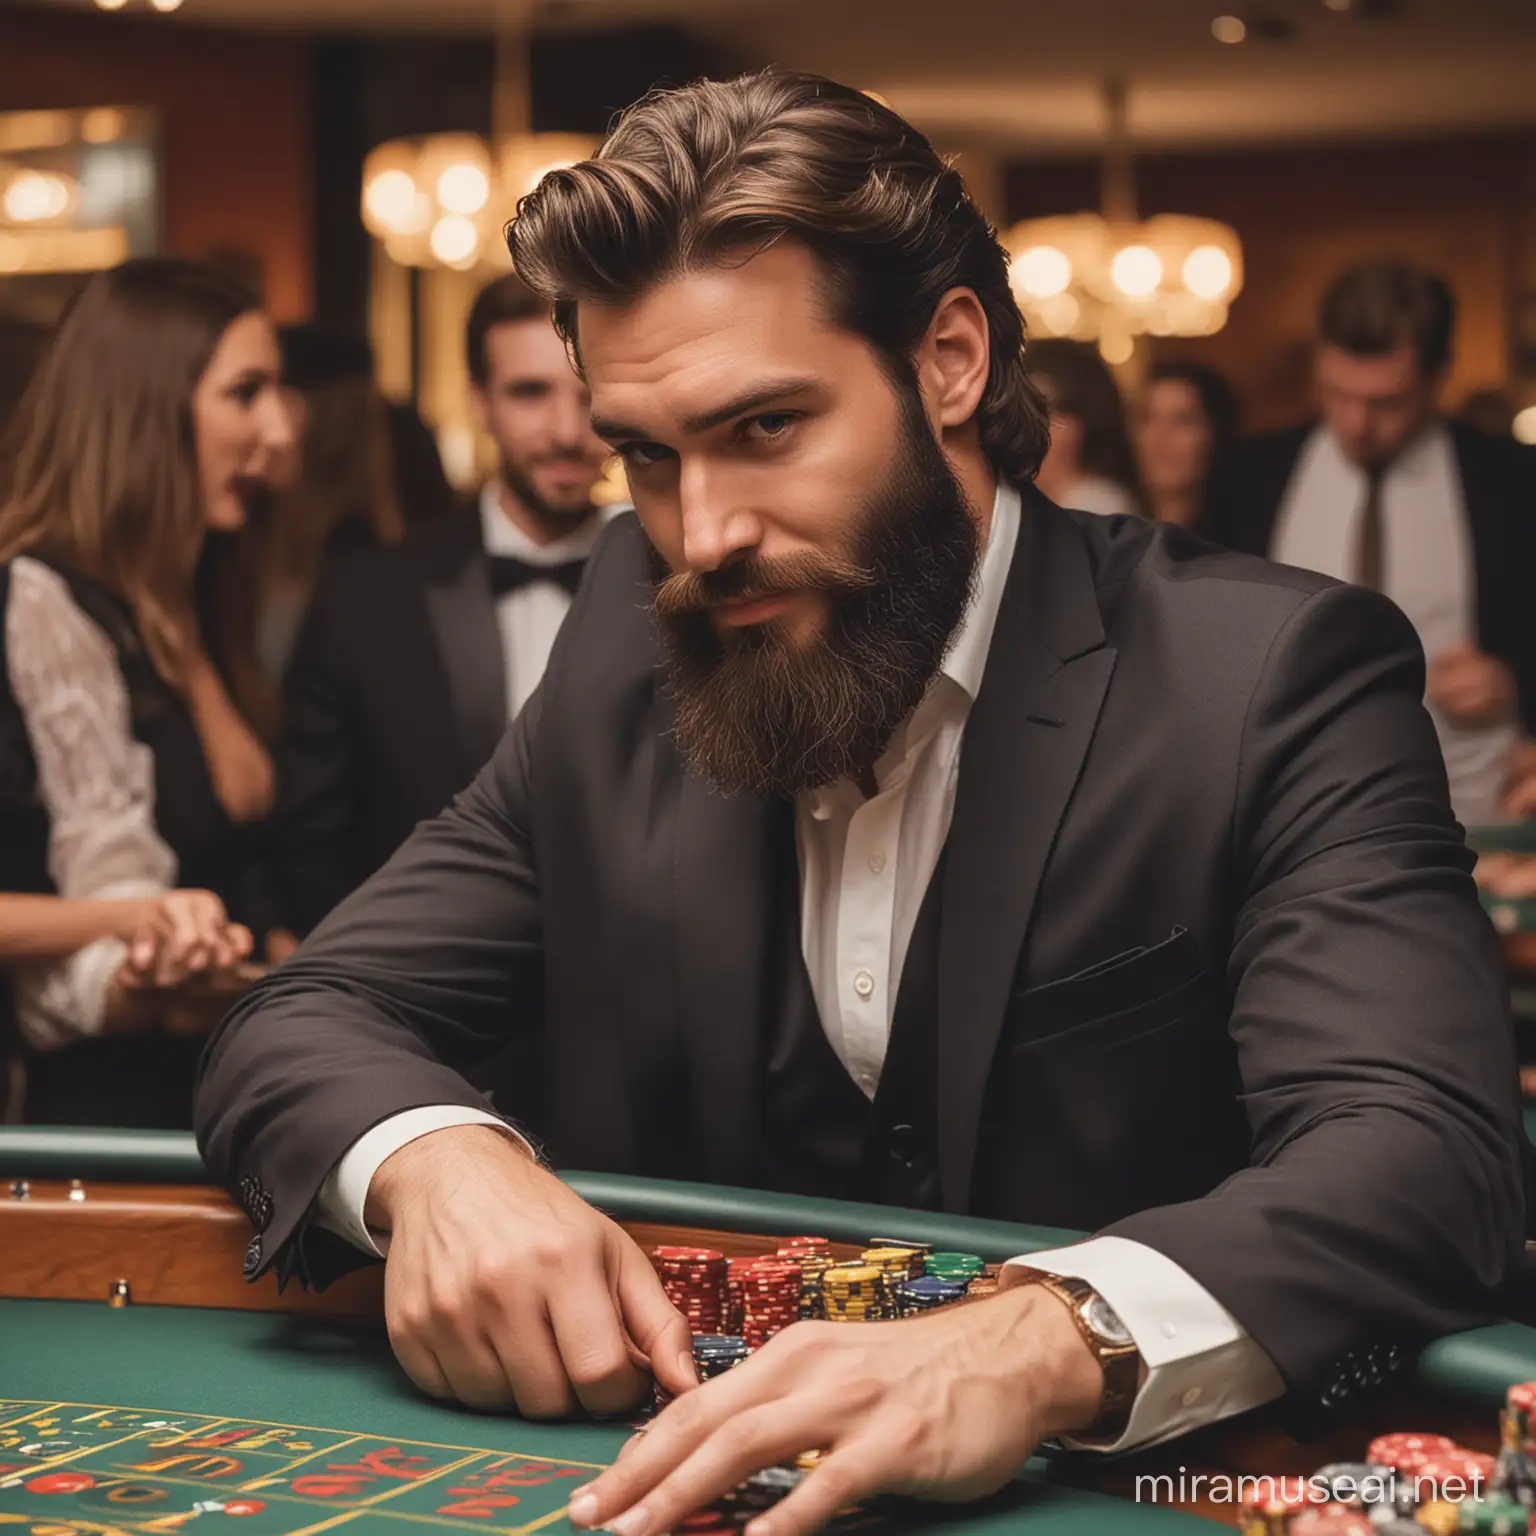 A handsome bearded man at the roulette table